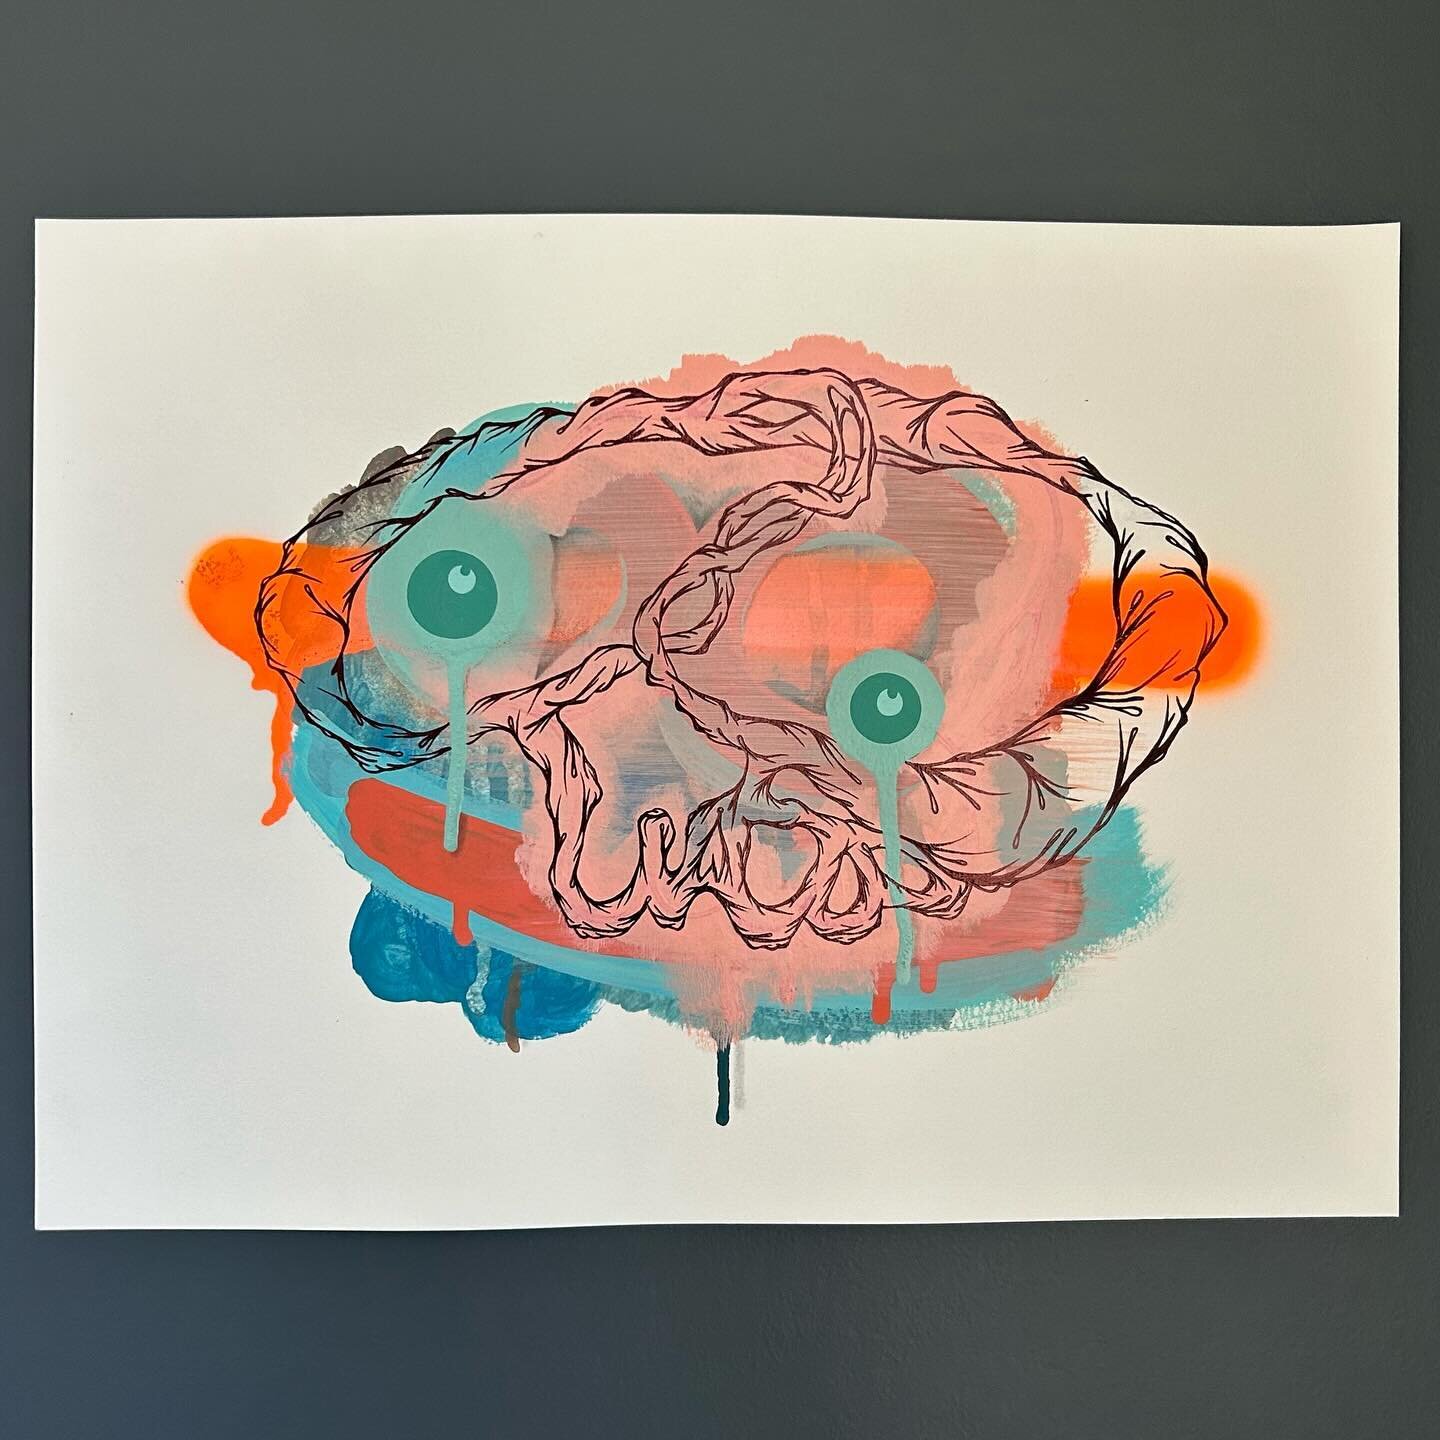 &ldquo;I&rsquo;ve Been Hit, But I&rsquo;m Not Dead&rdquo; AVAILABLE for purchase. Acrylic, spray paint, graphite and ink on 15&rdquo; x 11&rdquo; 140lb Canson watercolor paper. #saicalumni #tracygjones #instart #createwithblick #spraypaint